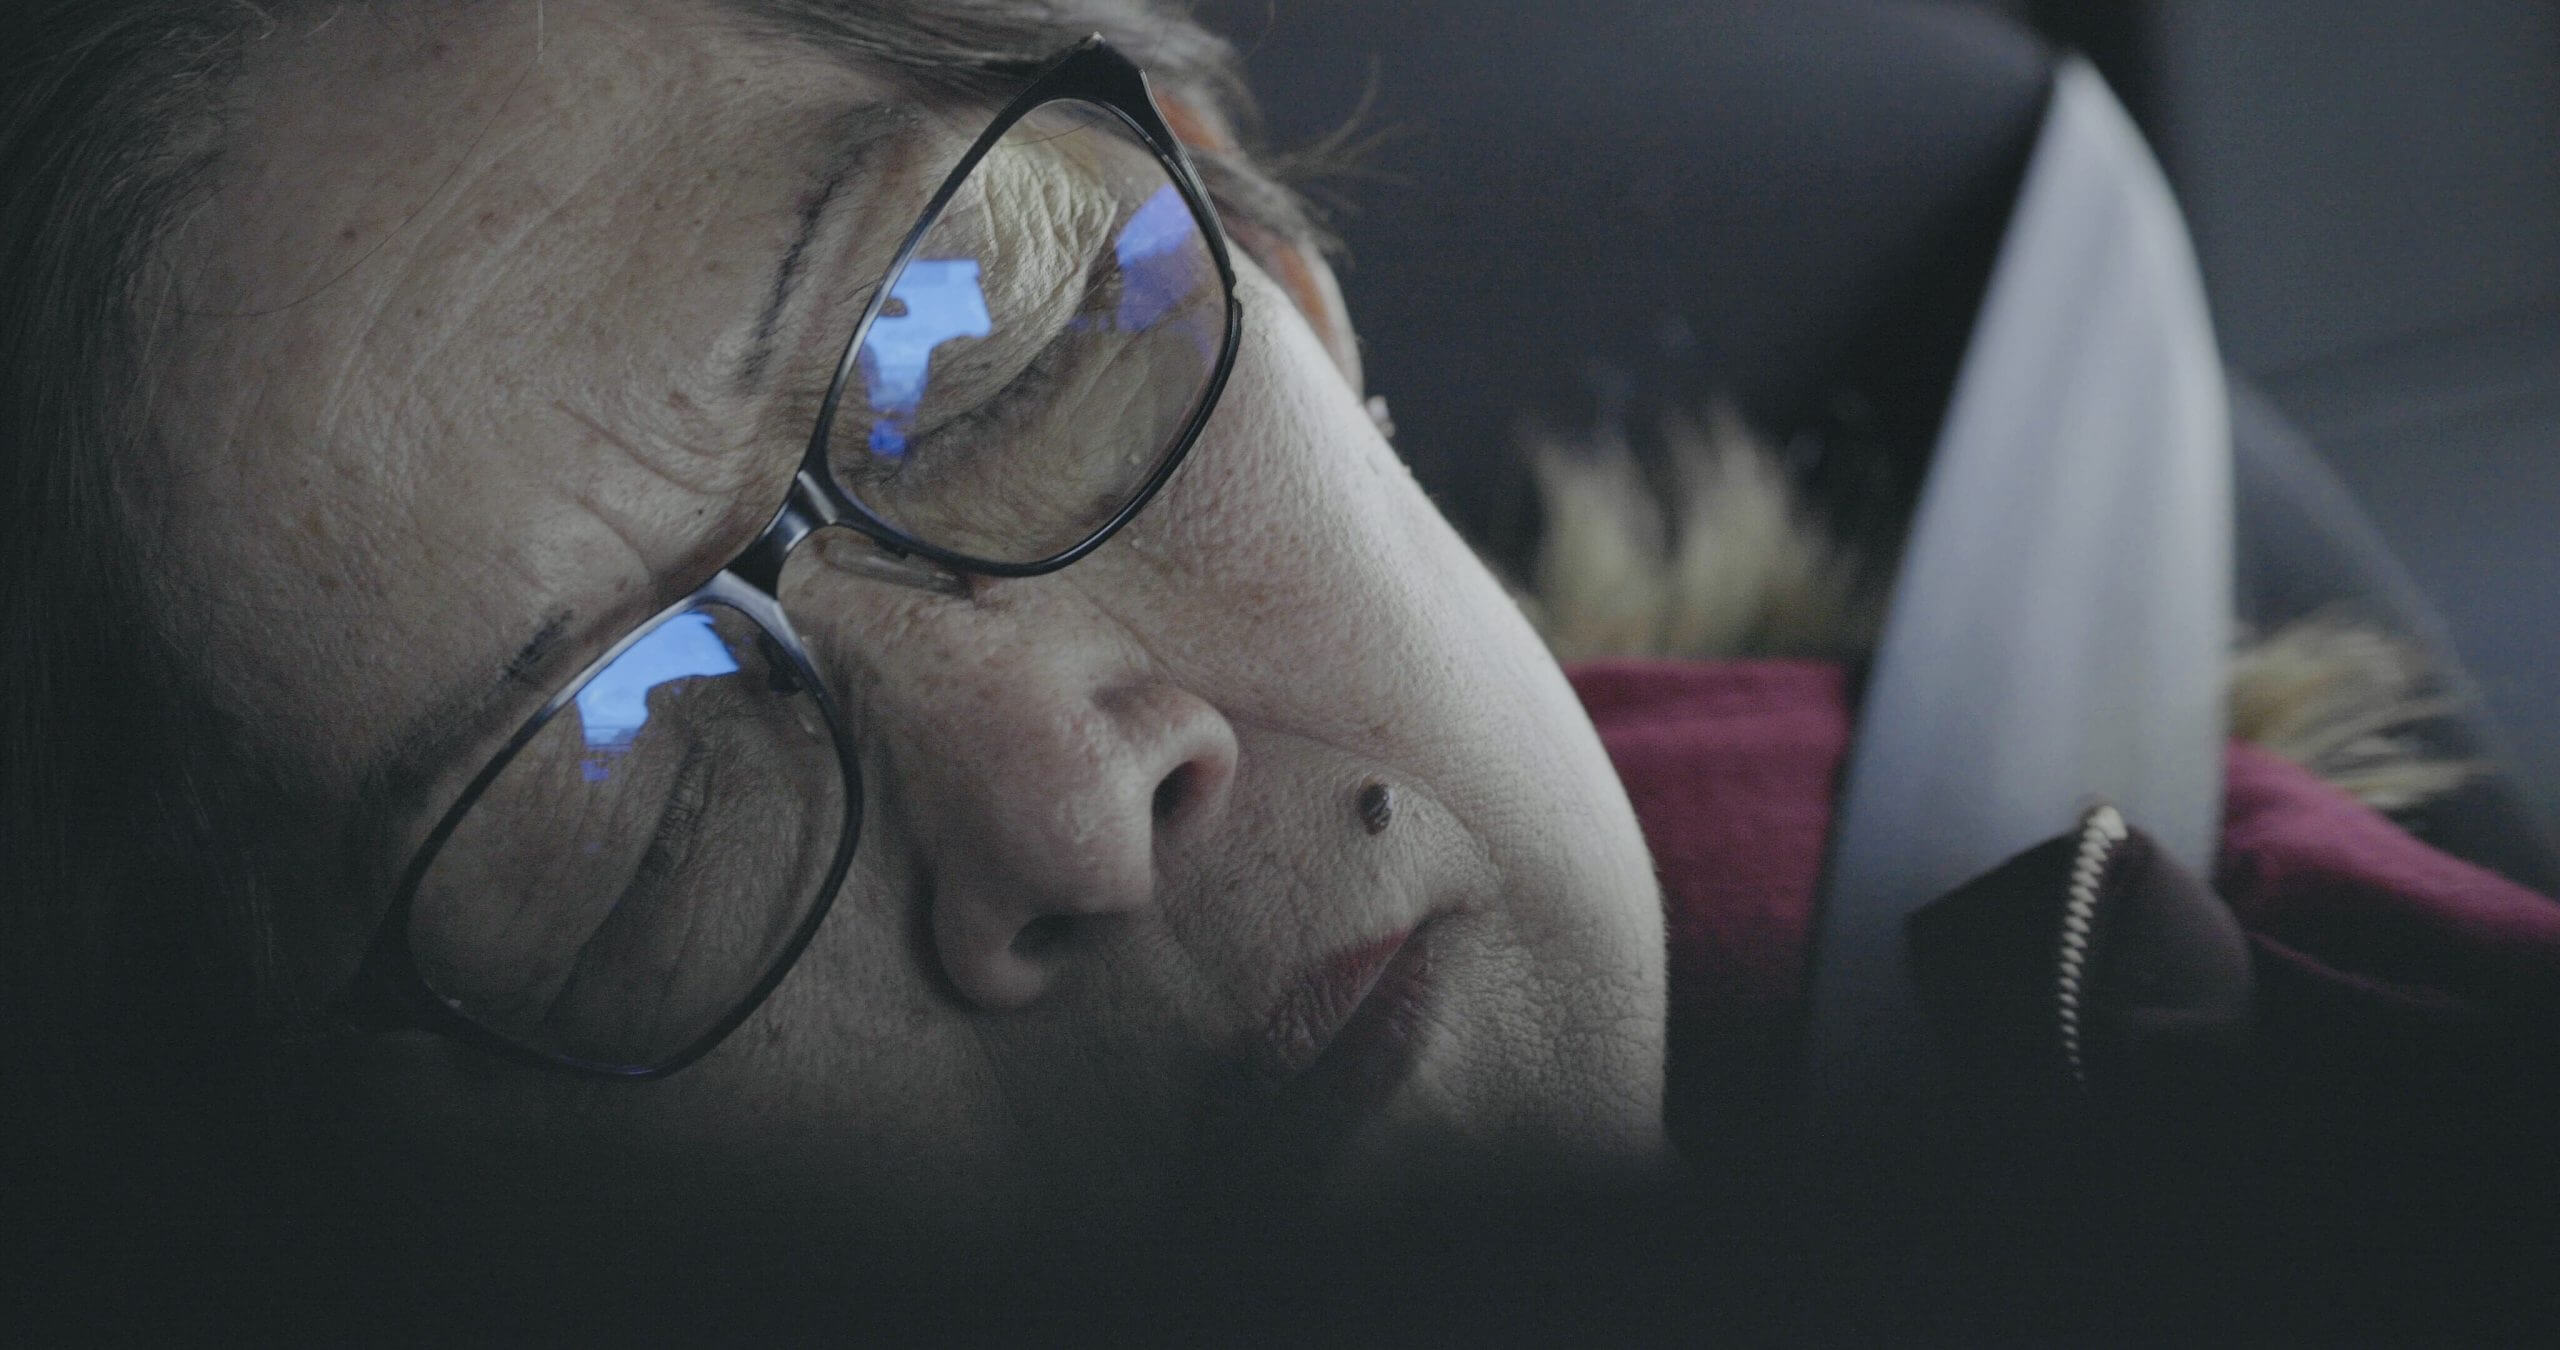 Still from Eskape. A close up of a woman sitting in a car with the seatbelt fastened. She wears glasses, and she is leaning her head to the side with her eyes closed.